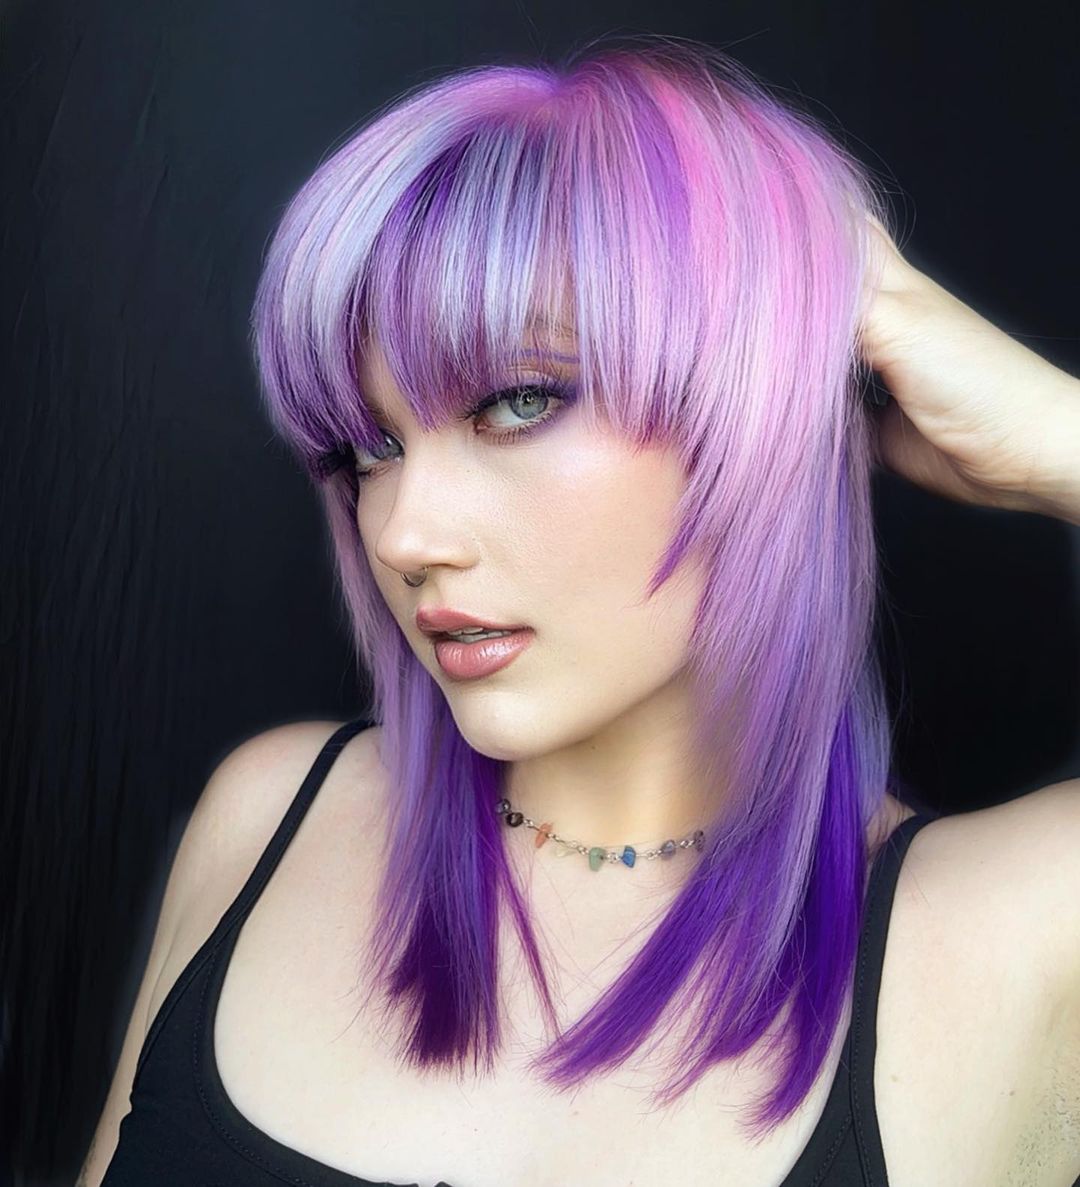 100+ Best Colorful Hair Ideas images 62